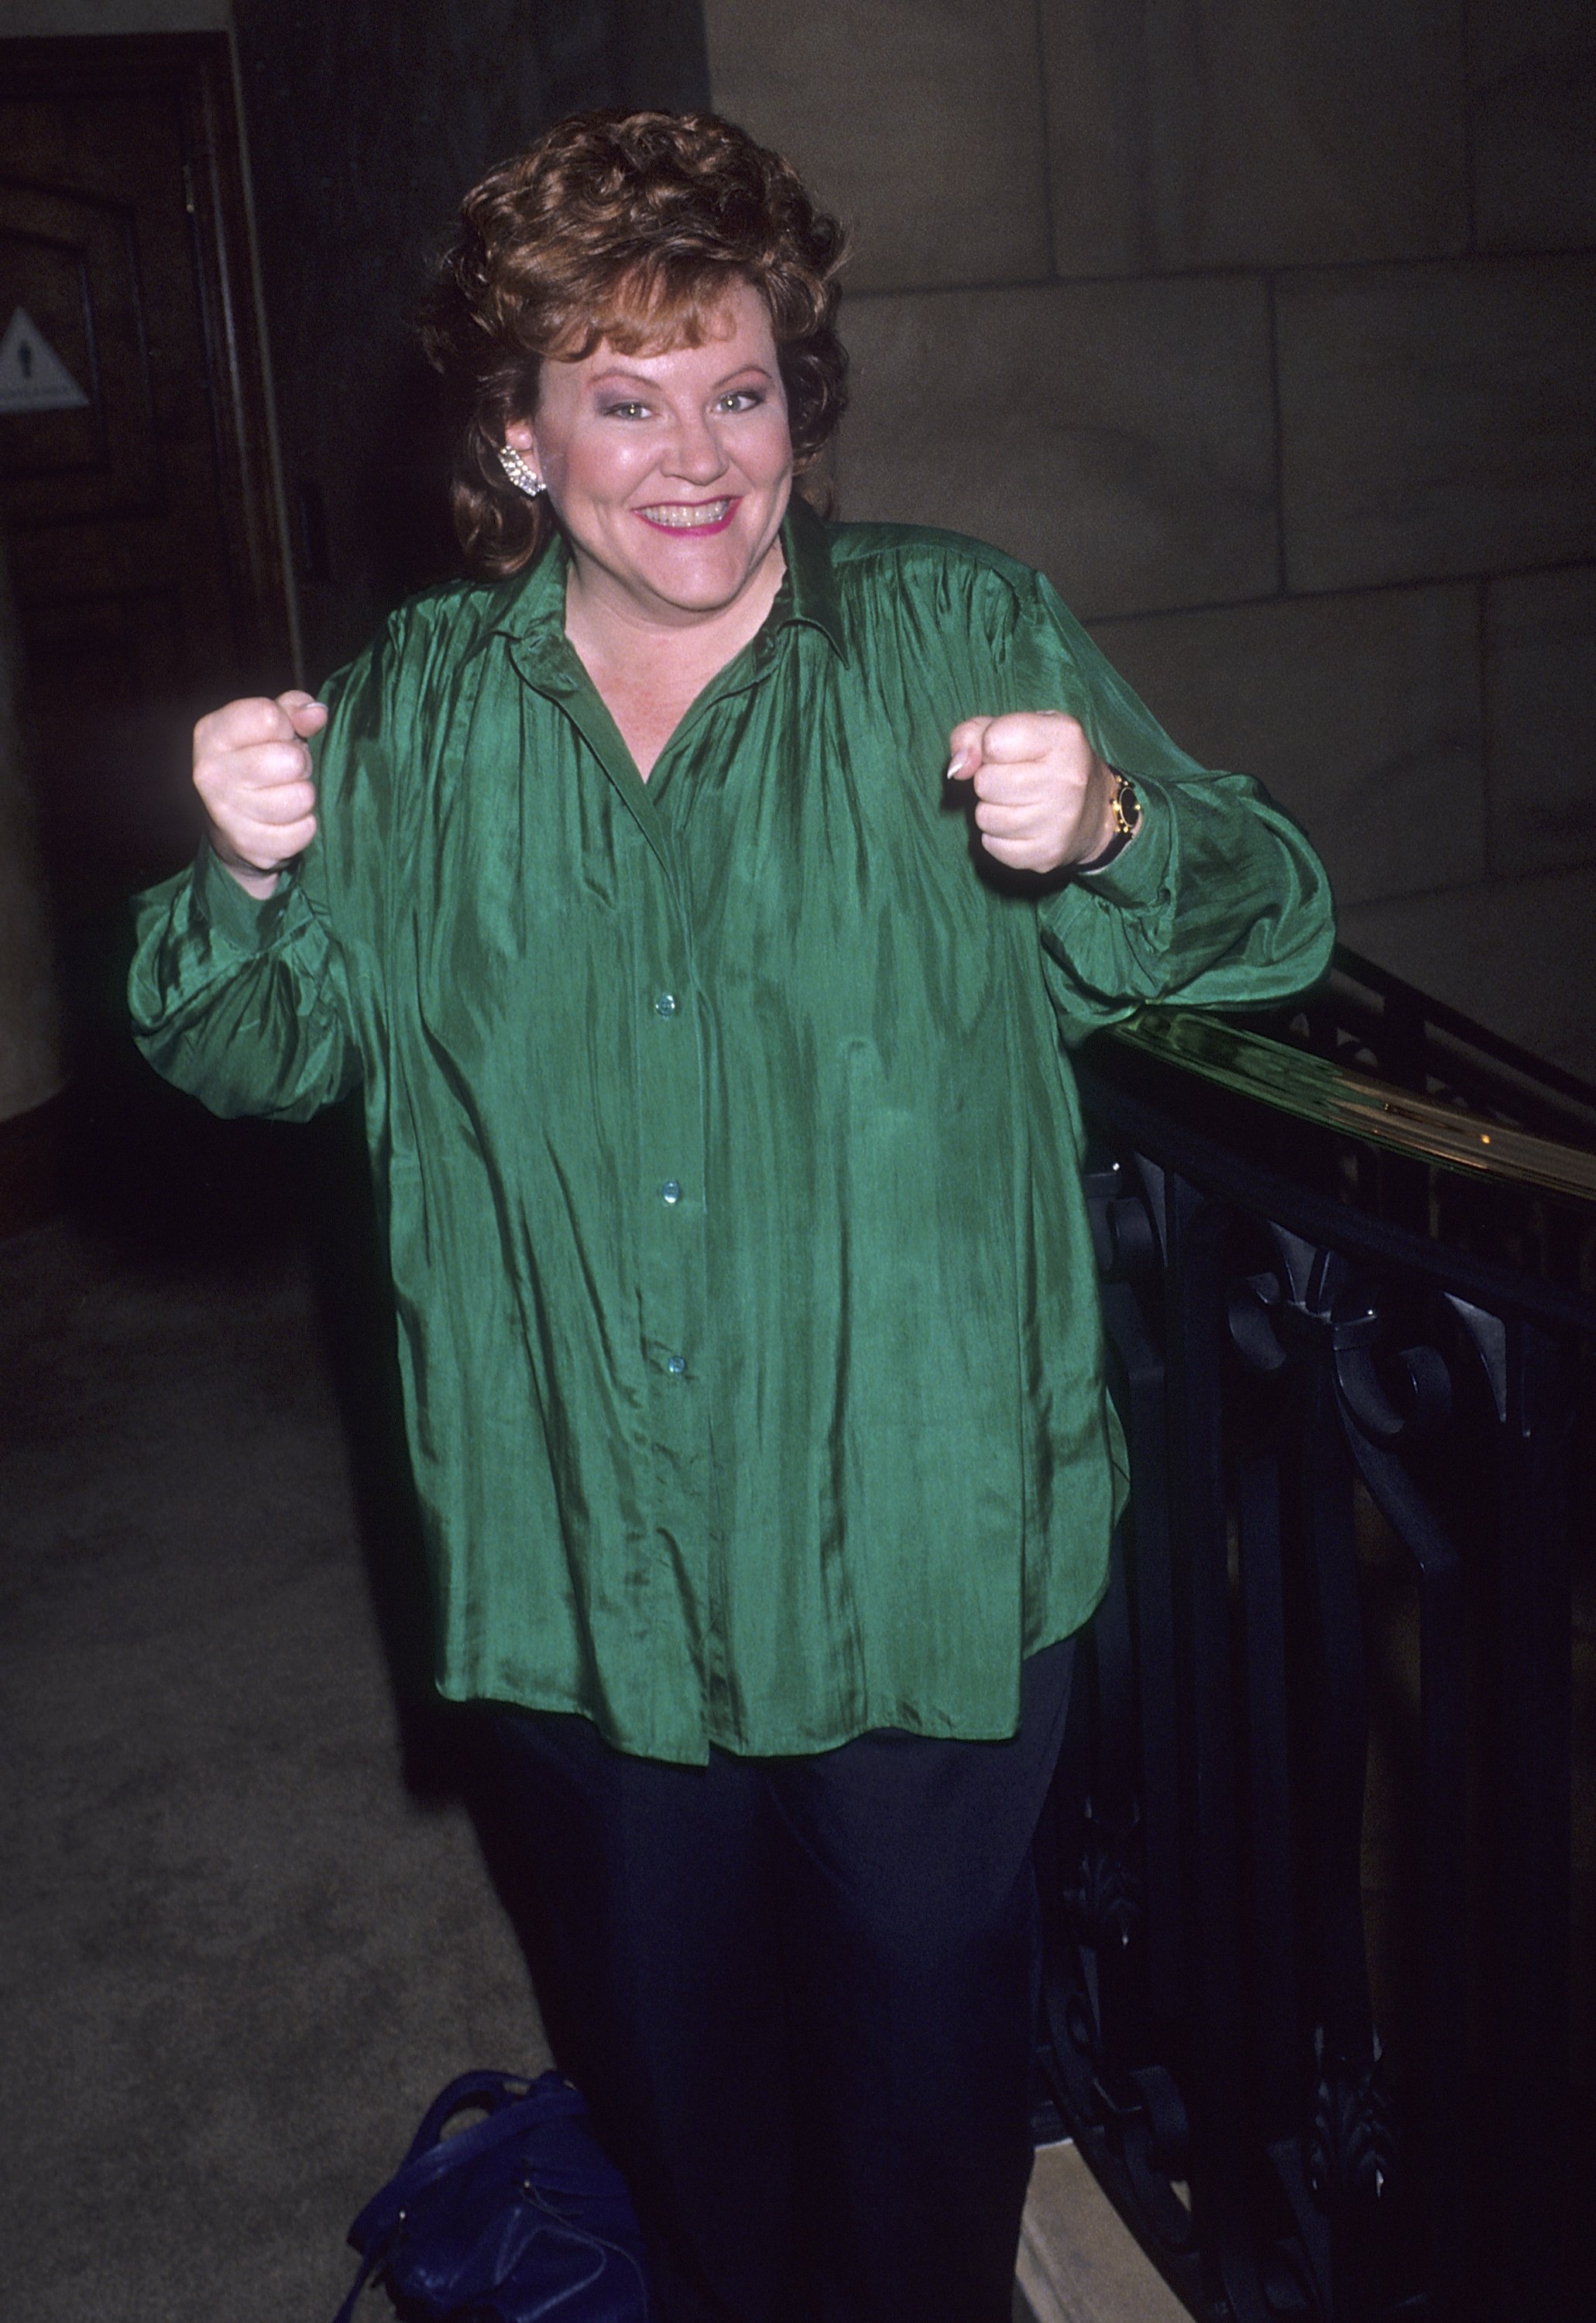  Actress Edie McClurg attends the Great American Celebrity Road Rally to Benefit Second Chance and Bread for Life - Pre-Rally Celebration on November 10, 1989 at Ma Maison Sofitel in Los Angeles, California. | Source: Getty Images